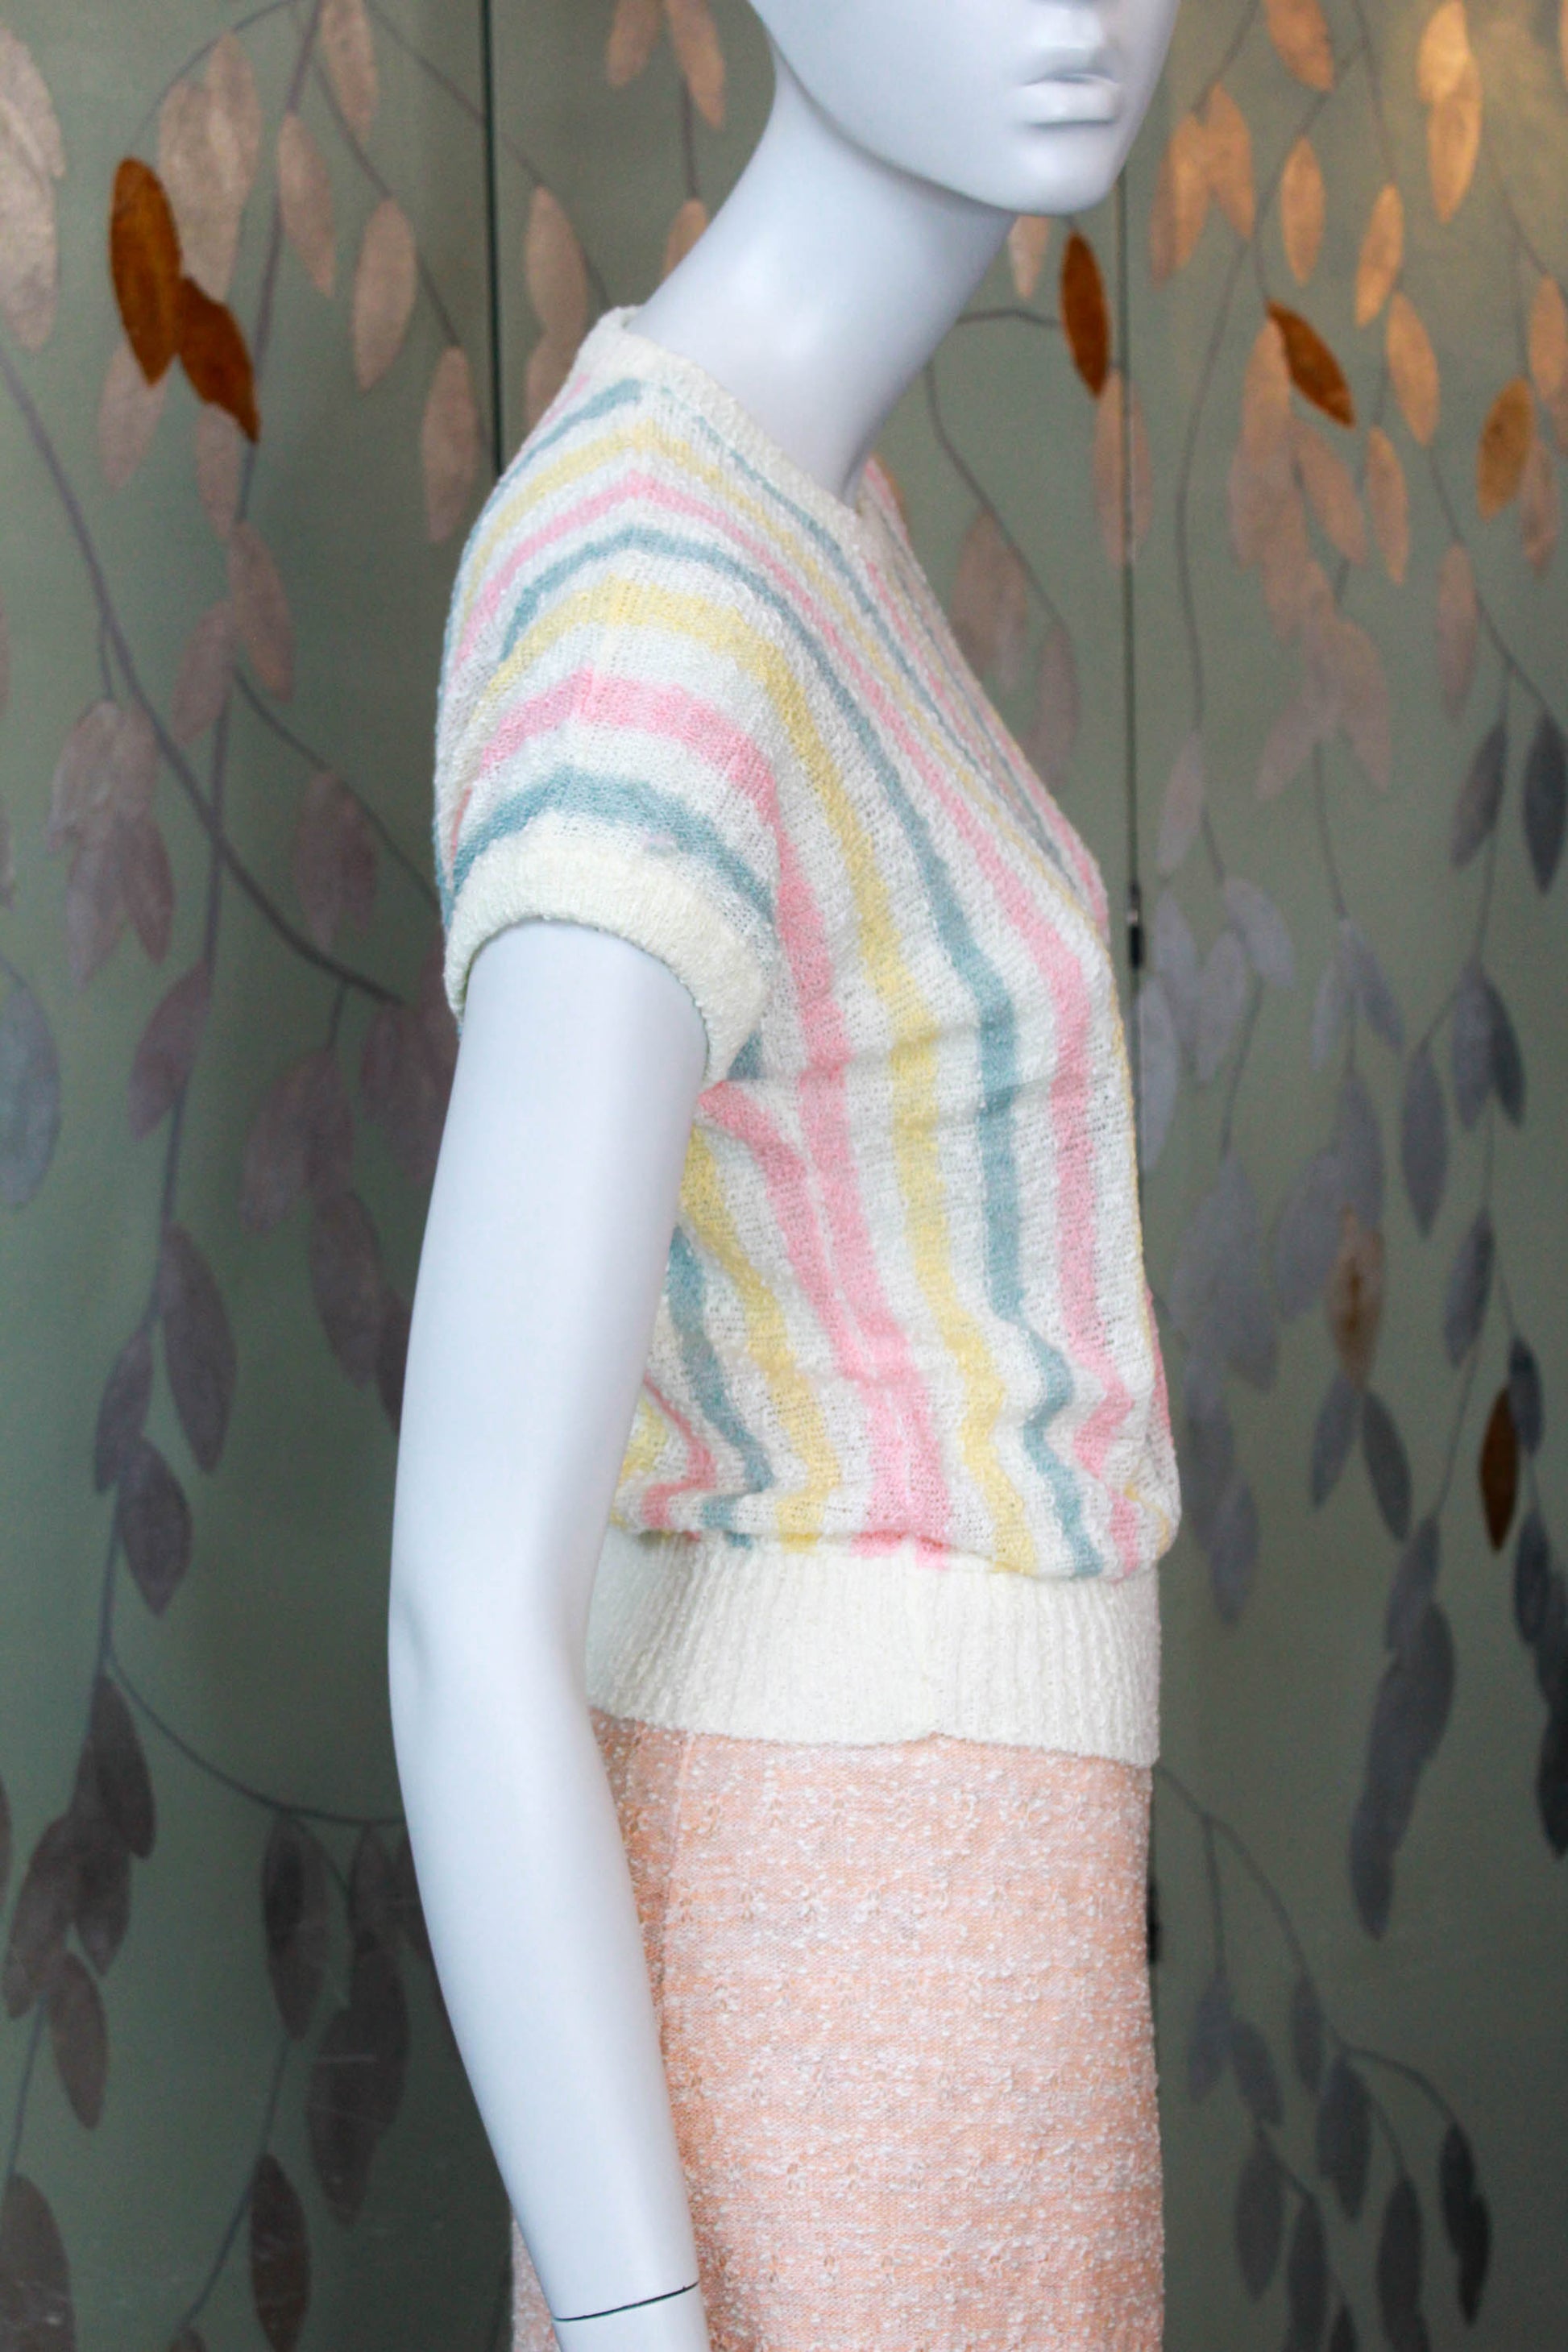 80s deadstock knit short sleeve top with vertical pink, yellow and green stripes against cream, ribbed hem